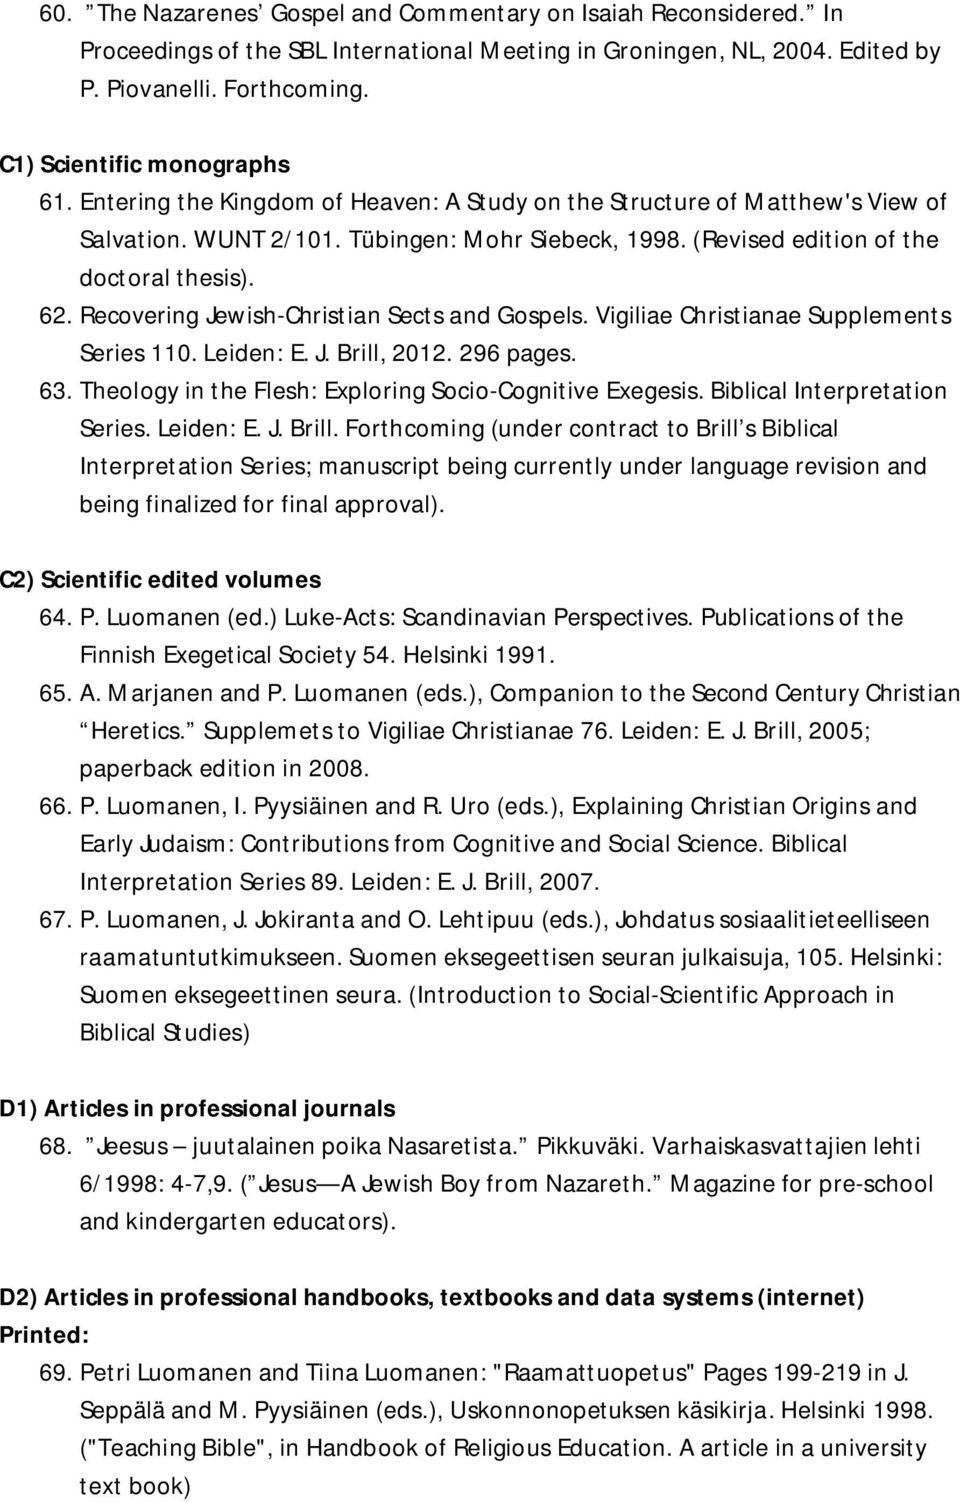 (Revised edition of the doctoral thesis). 62. Recovering Jewish-Christian Sects and Gospels. Vigiliae Christianae Supplements Series 110. Leiden: E. J. Brill, 2012. 296 pages. 63.